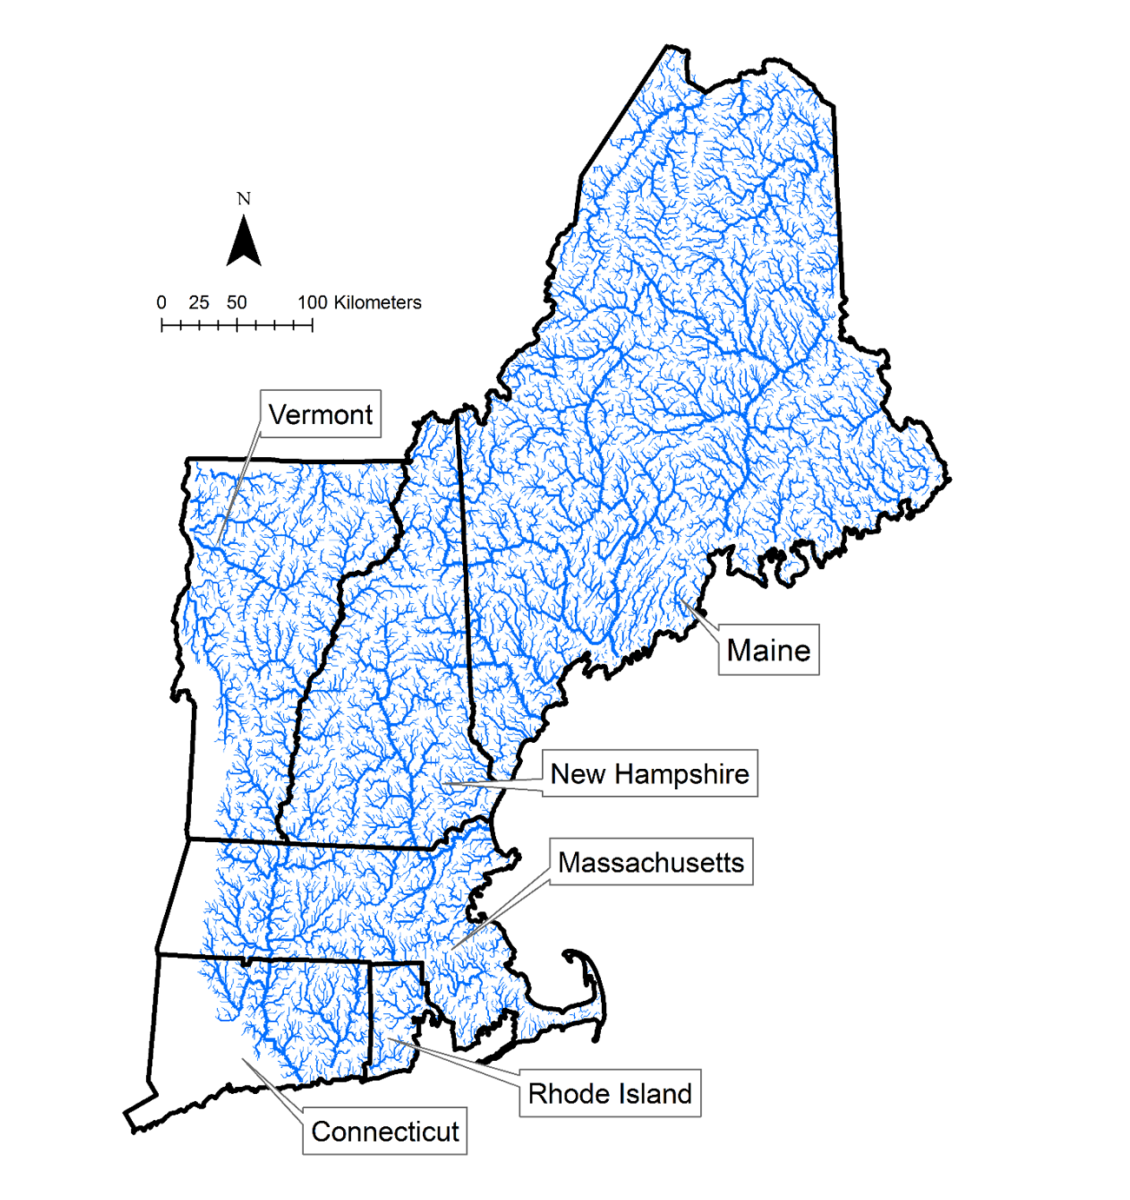 Mapping the Value of Water Quality Improvements